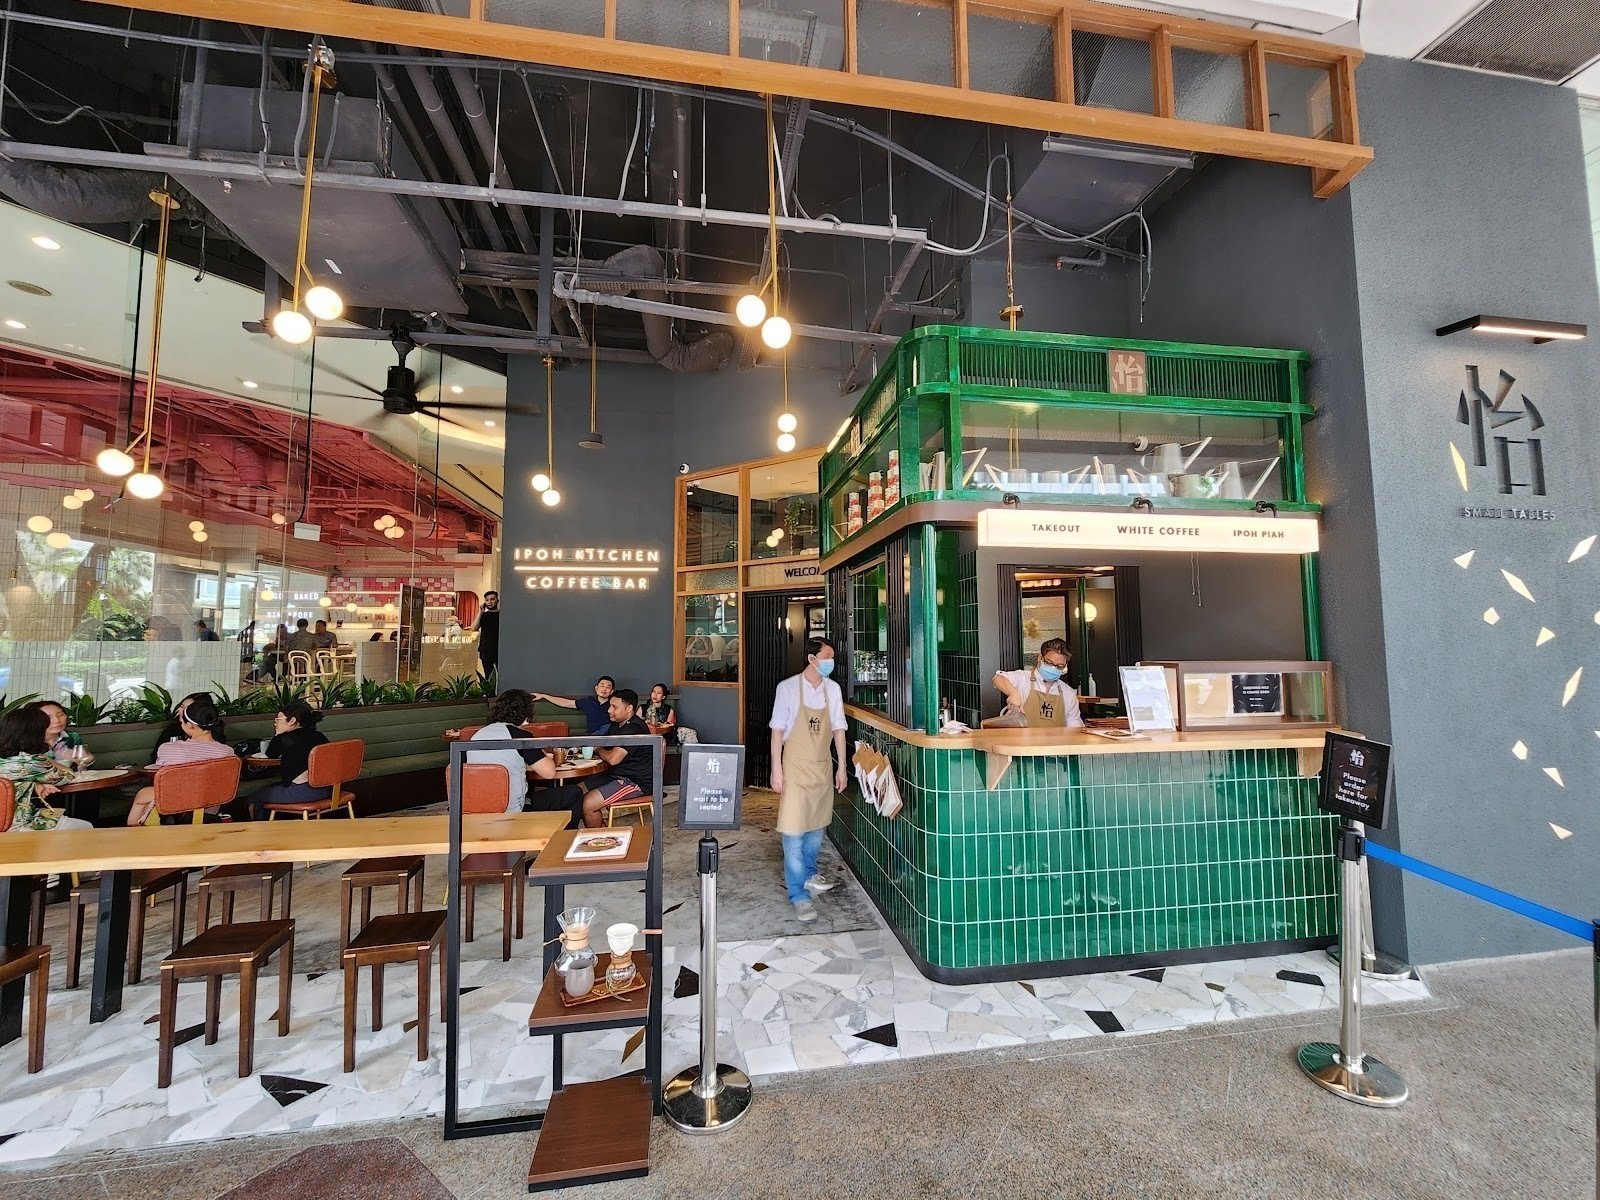 <span class="translation_missing" title="translation missing: en.meta.location_title, location_name: Ipoh Kitchen Coffee Bar, city: Singapore">Location Title</span>